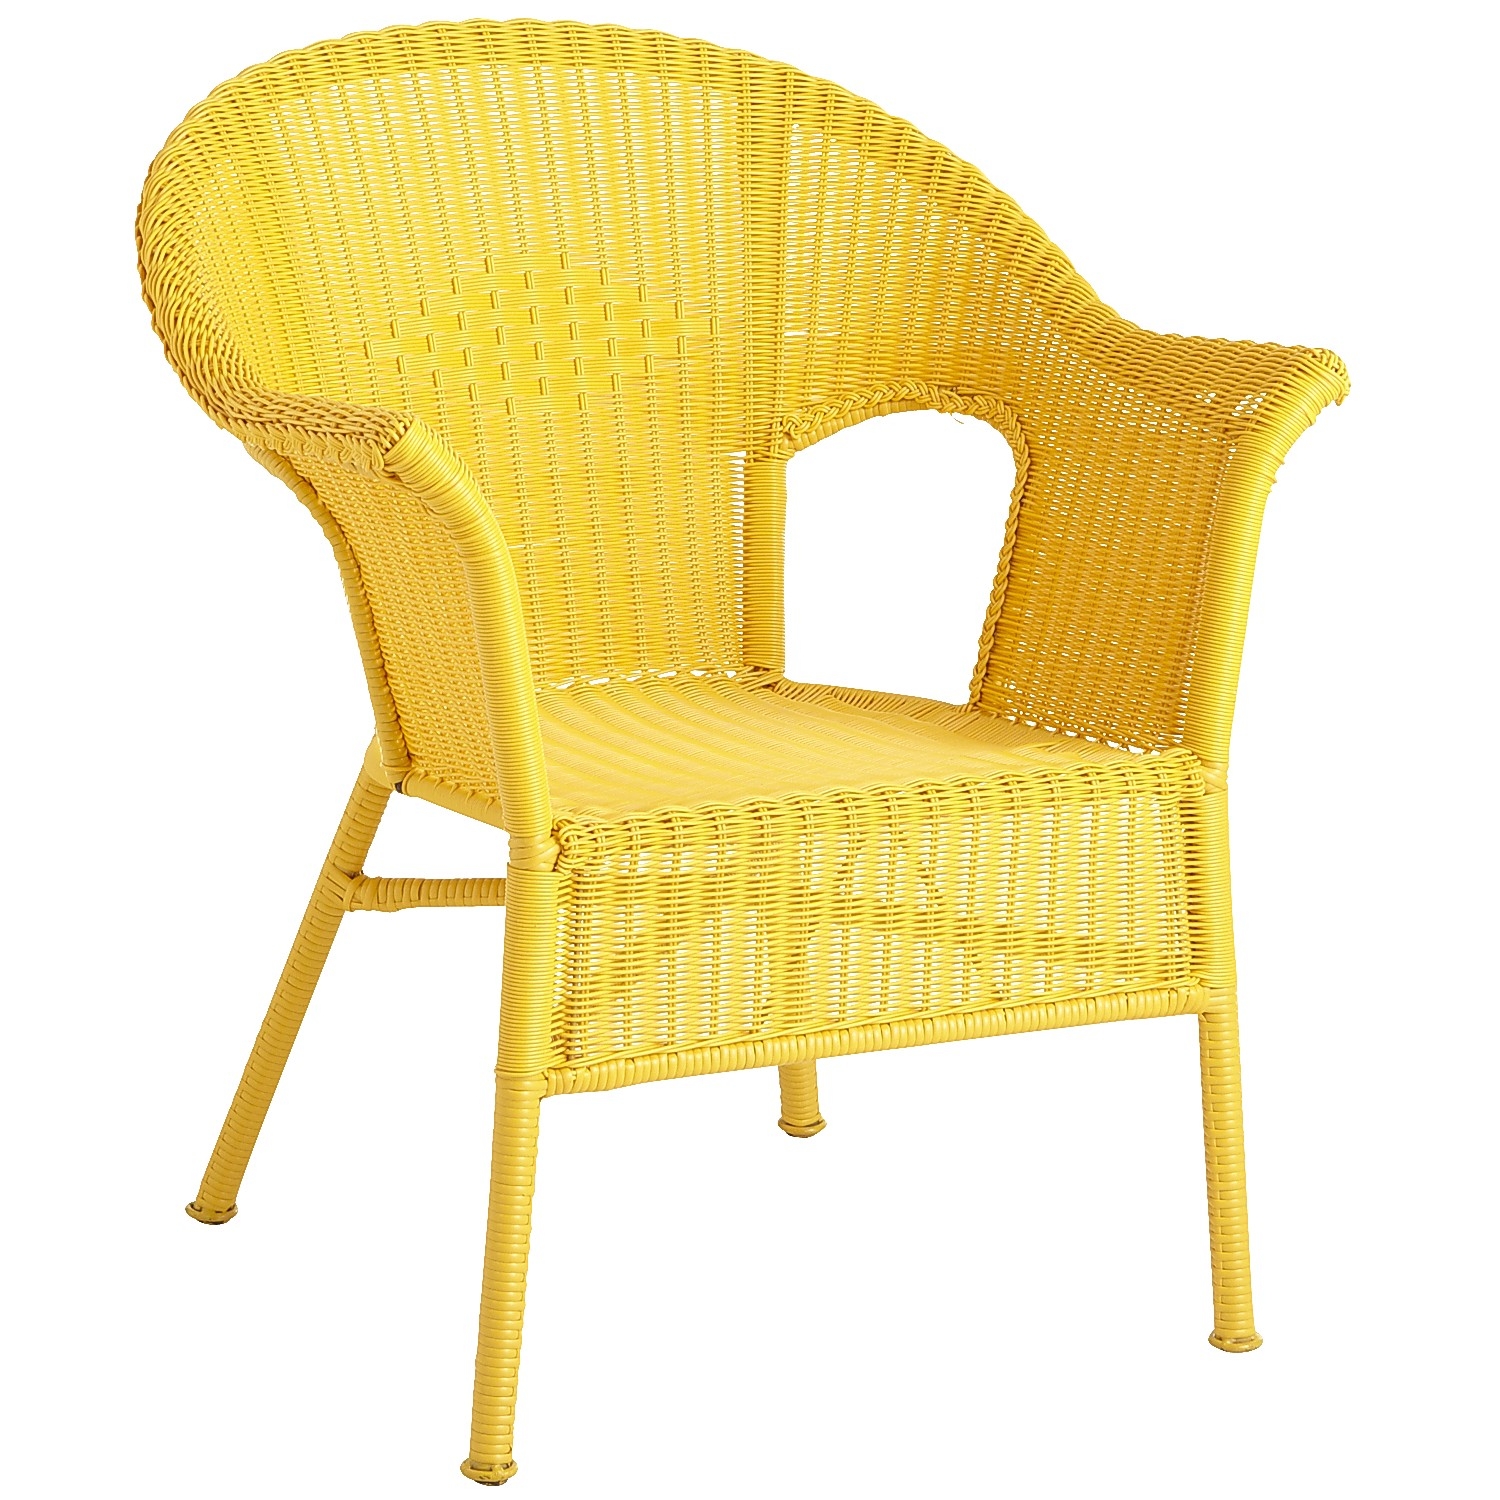 Stackable wicker chairs 5